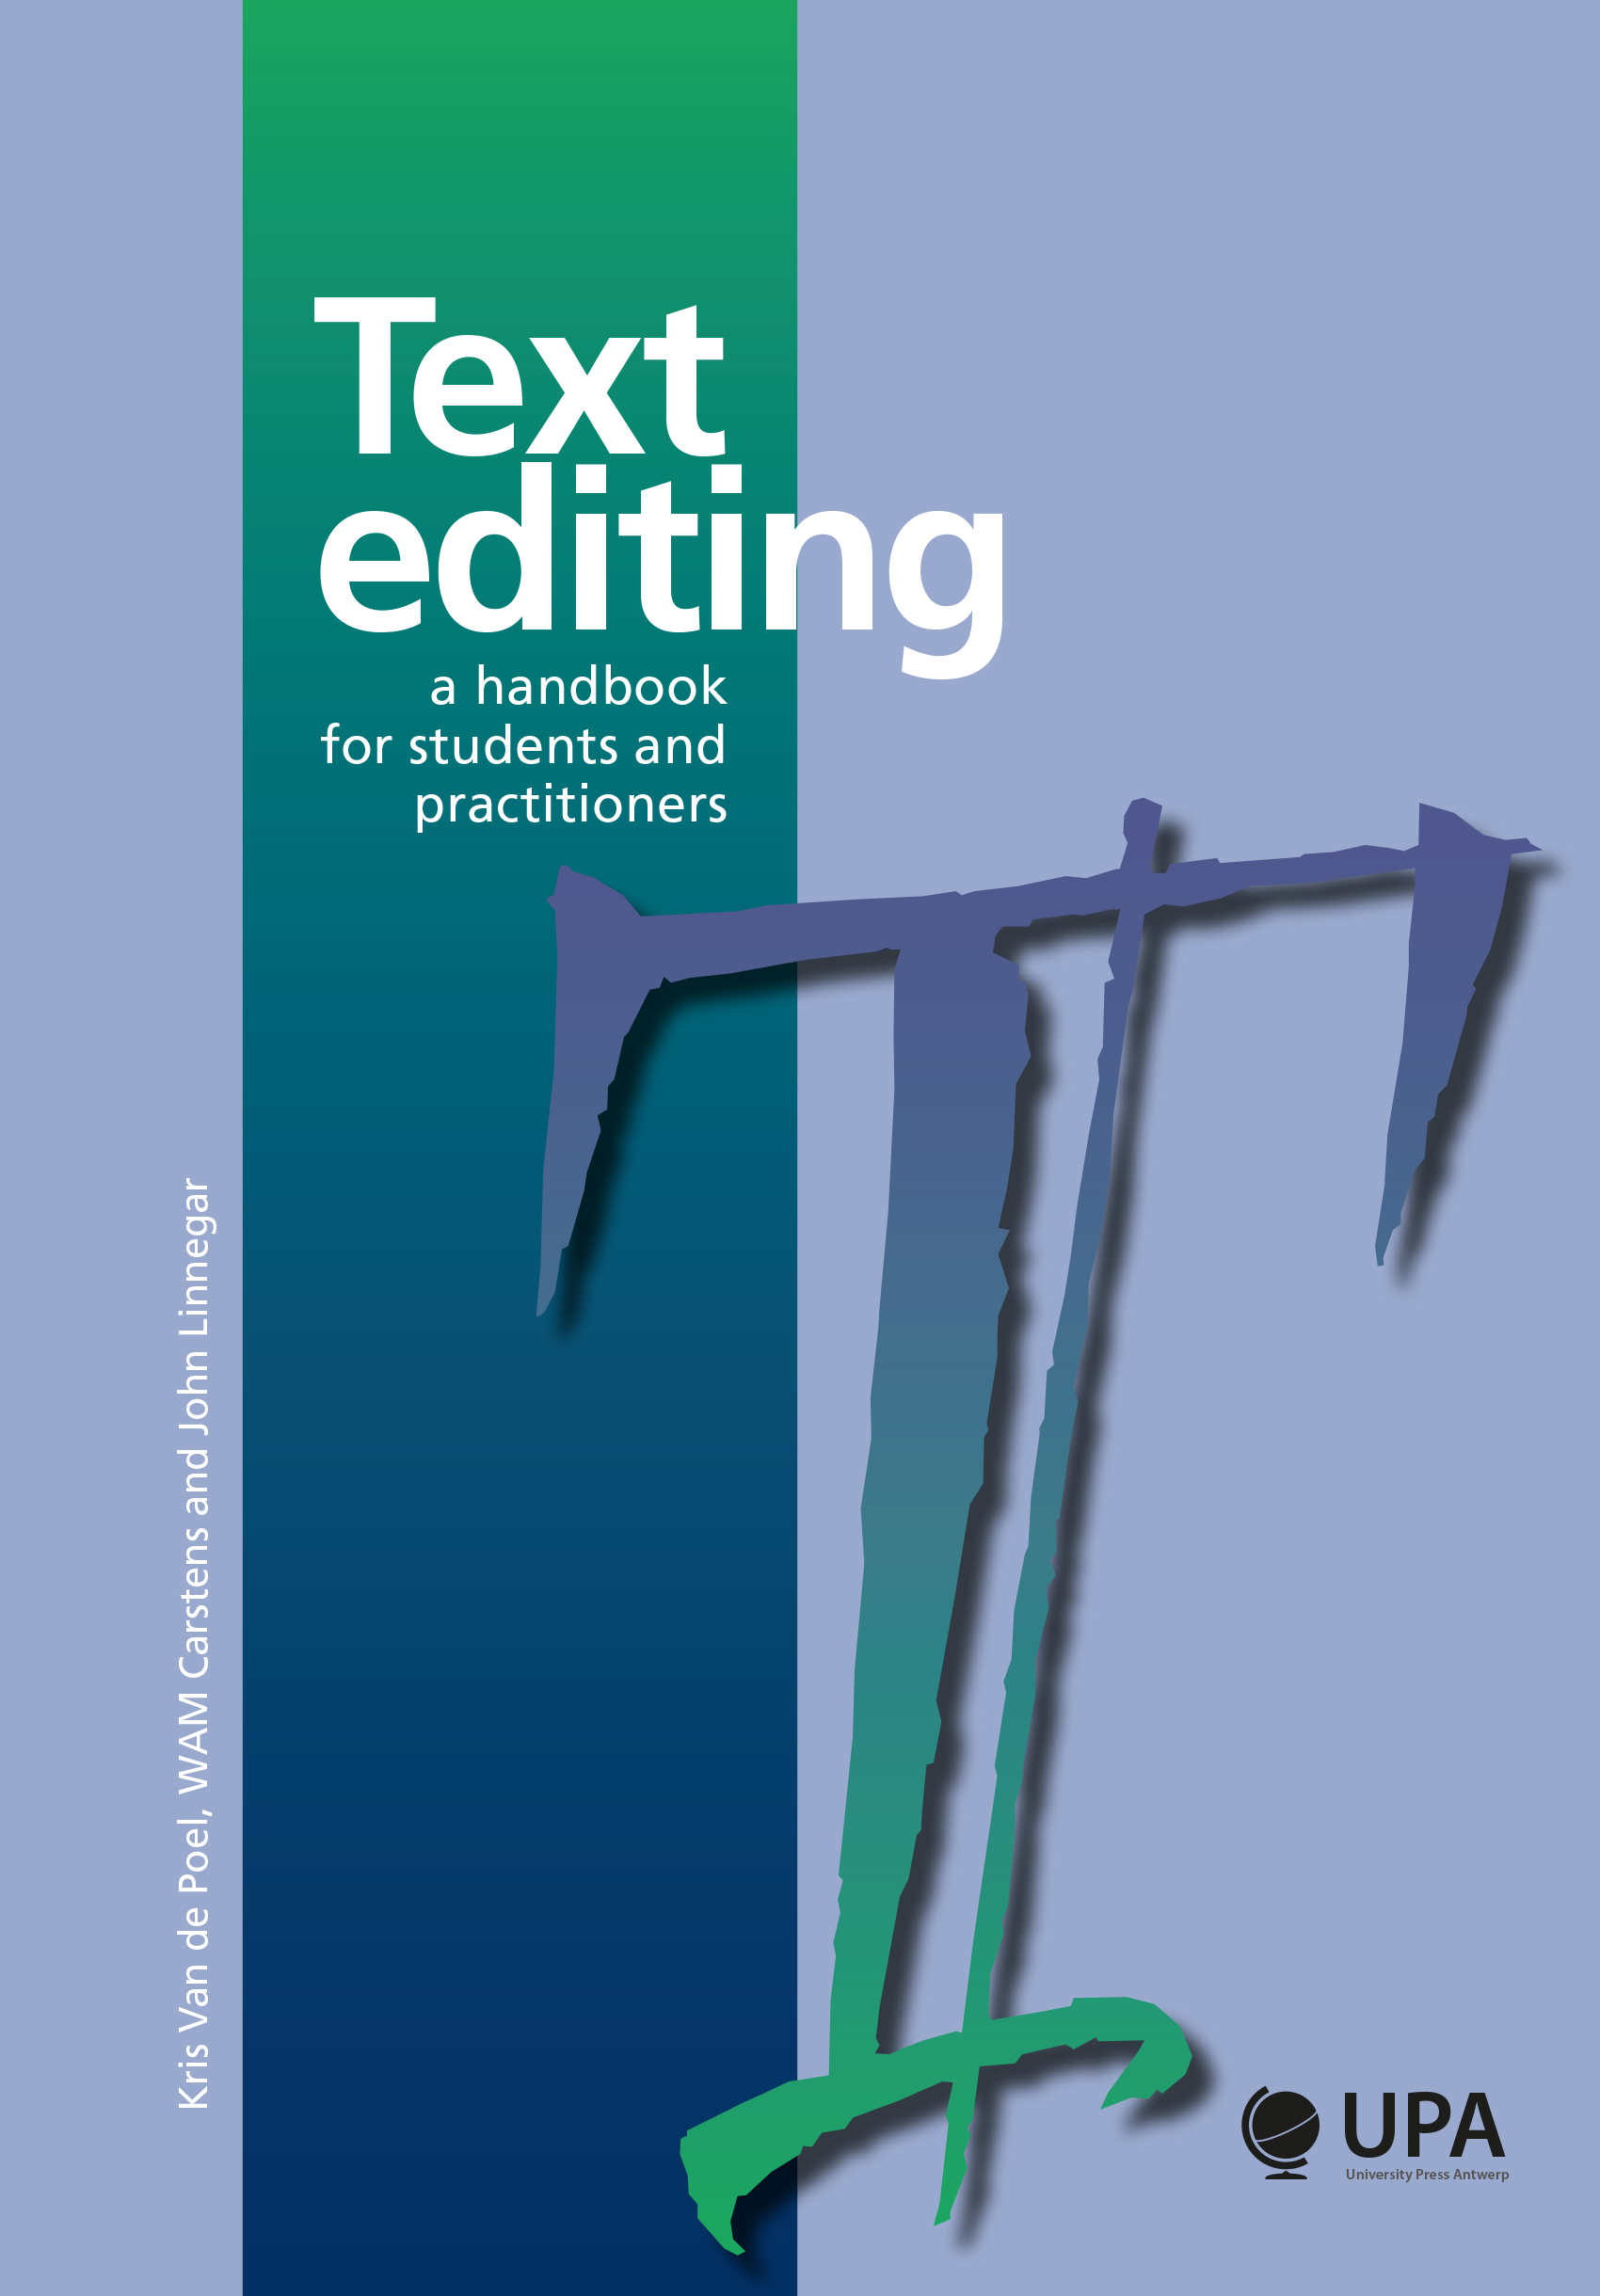 TEXT EDITING. A HANDBOOK FOR STUDENTS AND PRACTITIONERS